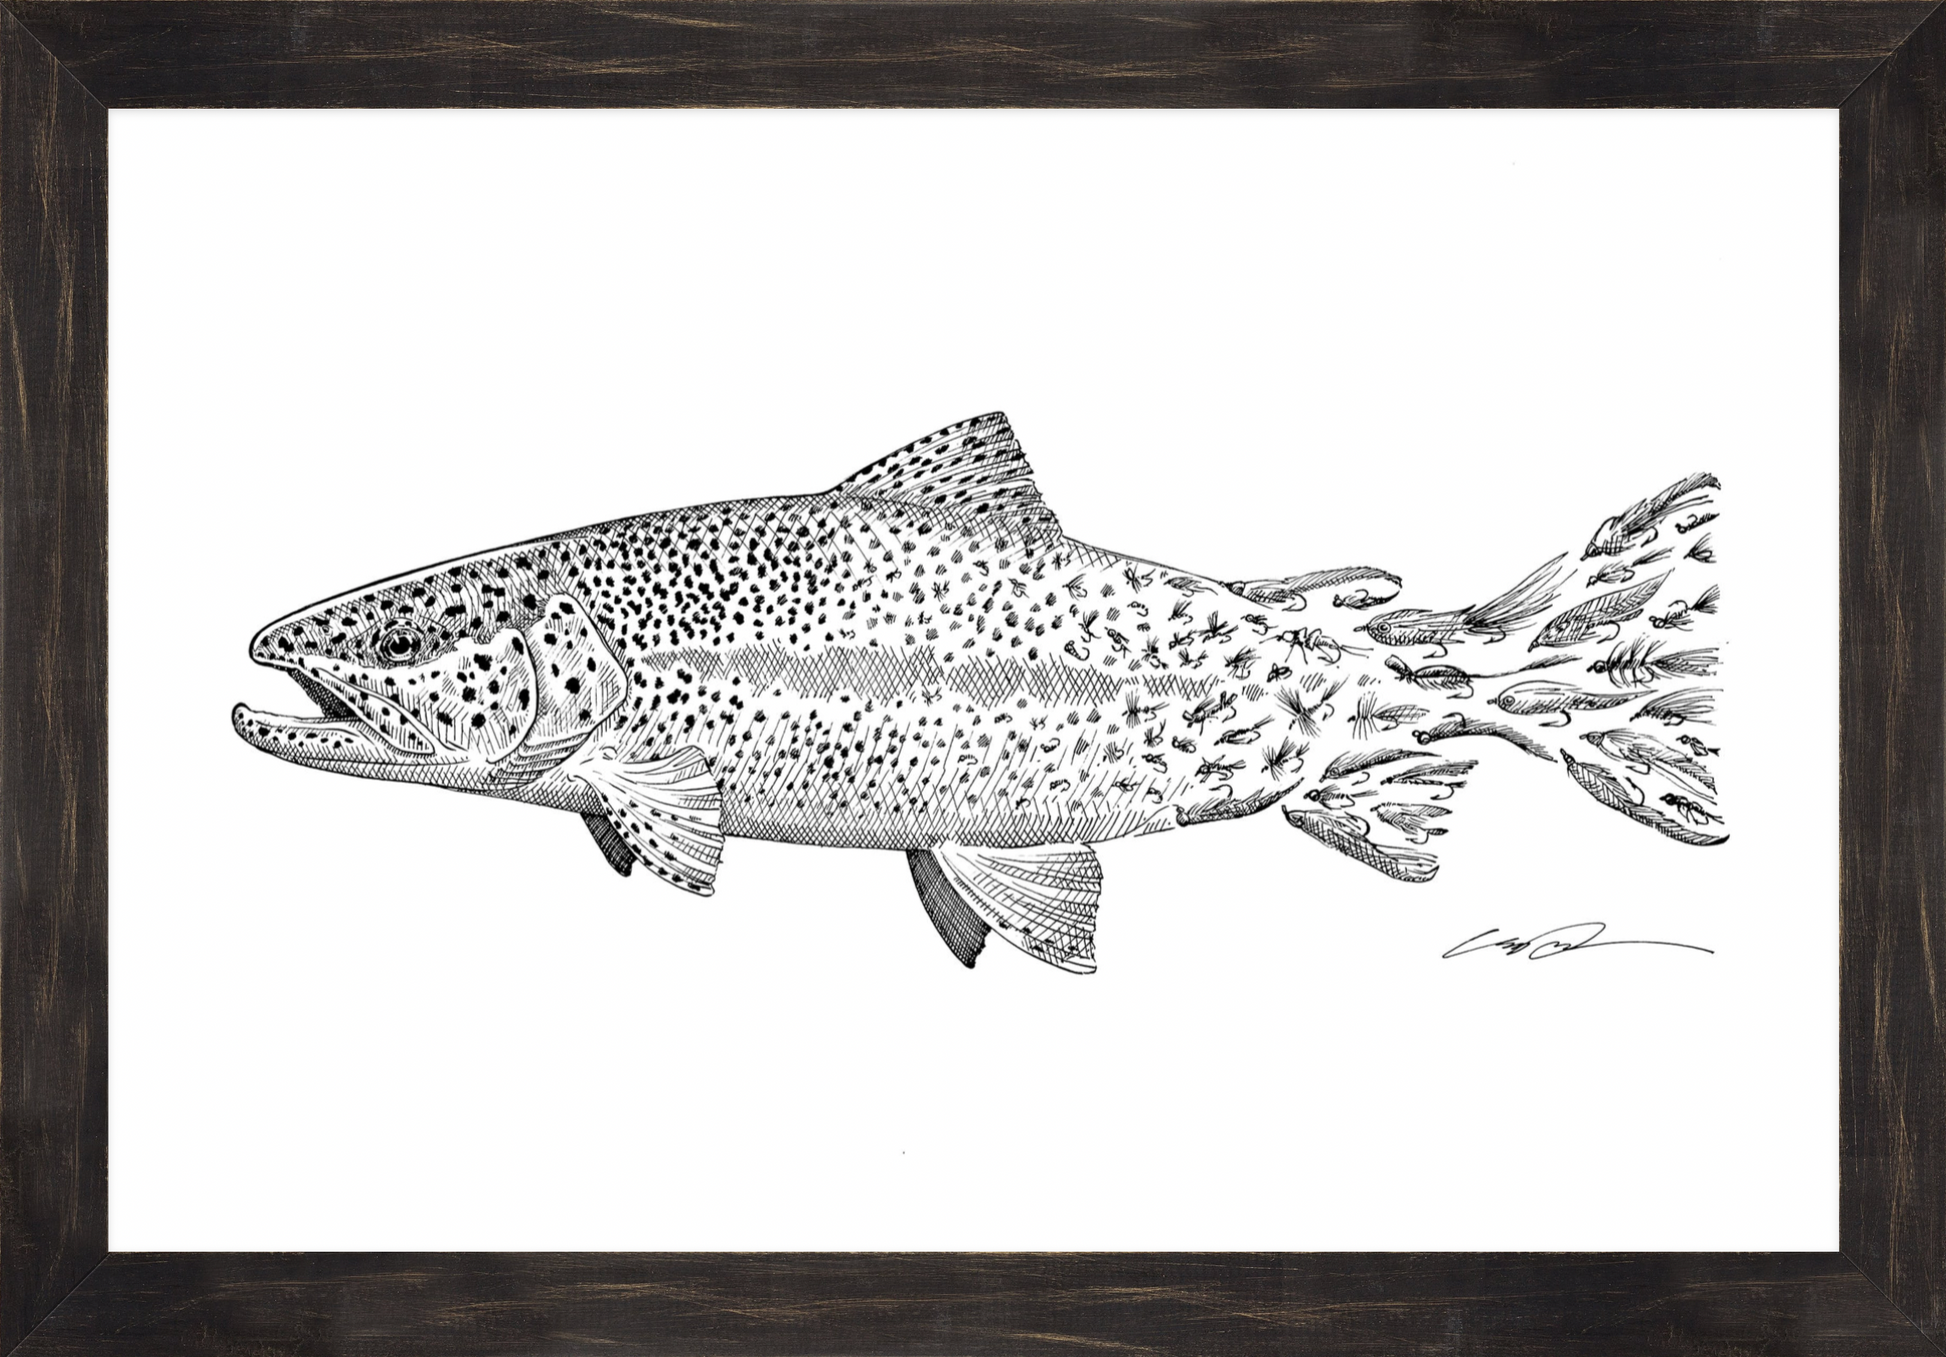 A pen and ink drawing of a rainbow trout where the trout's spots fade into flies to form the tail of the fish, framed in a dark wood frame